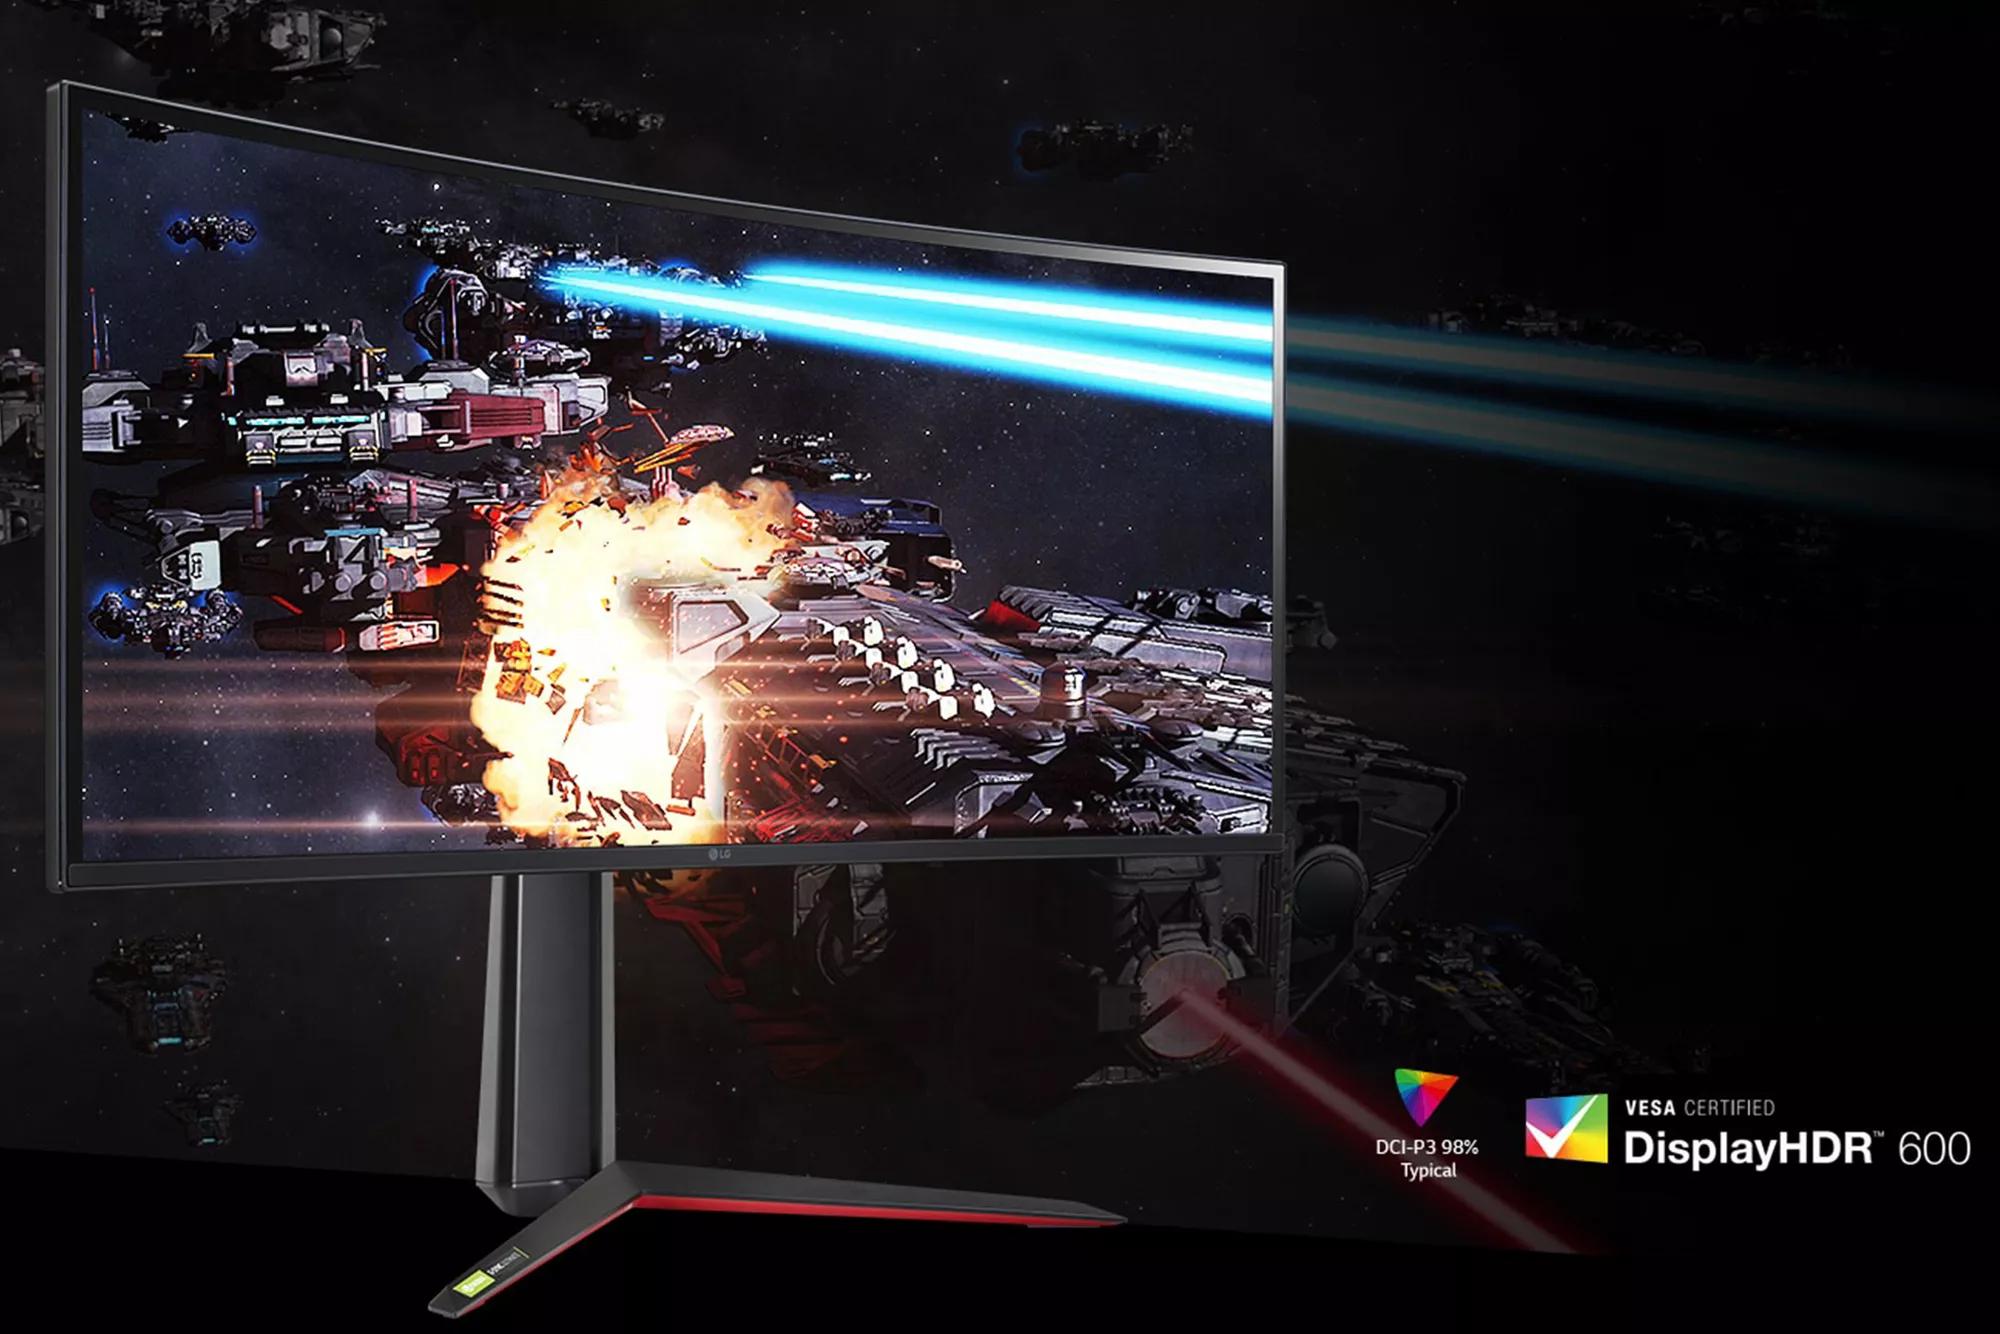 LG UltraGear curved gaming monitor displaying gaming scene in rich colors and contrast with VESA Display HDR600